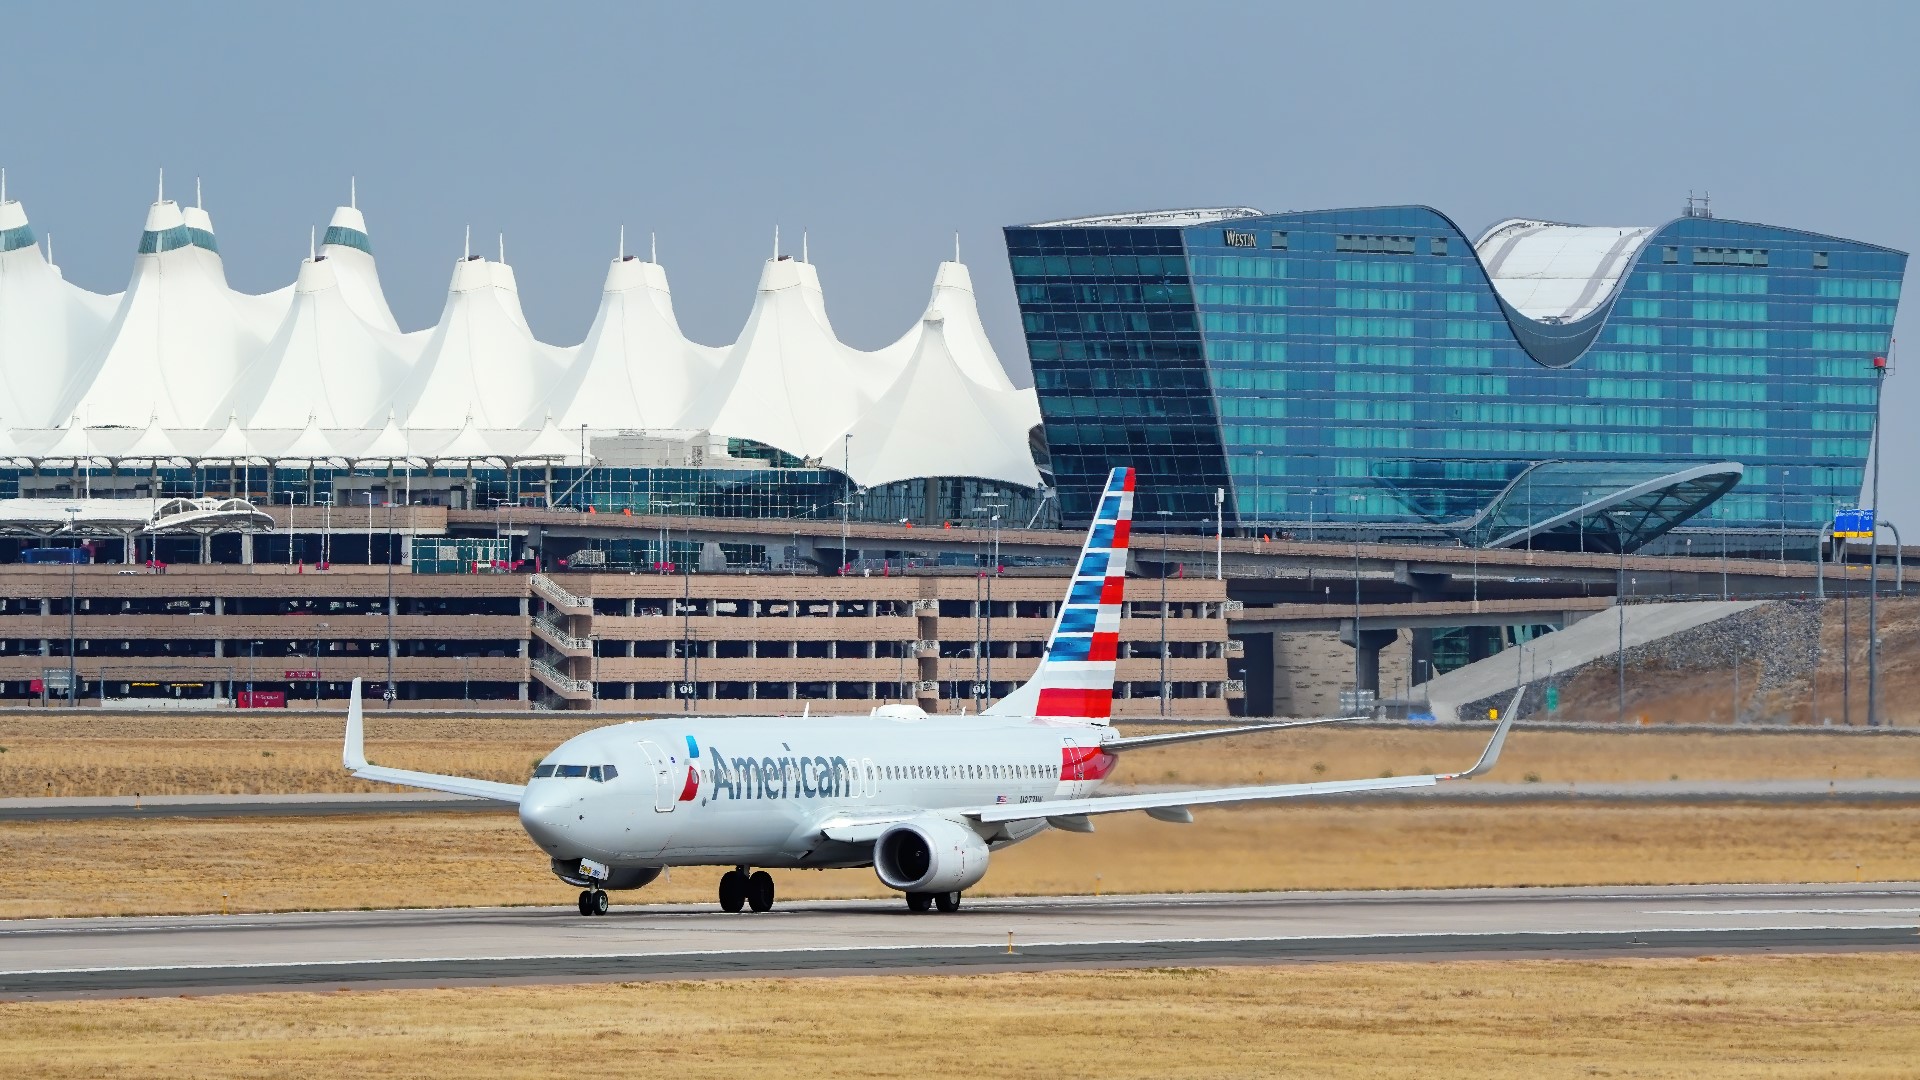 Powerful wind gusts ripped across Colorado causing hundreds of flights to be delayed or canceled at Denver International Airport.